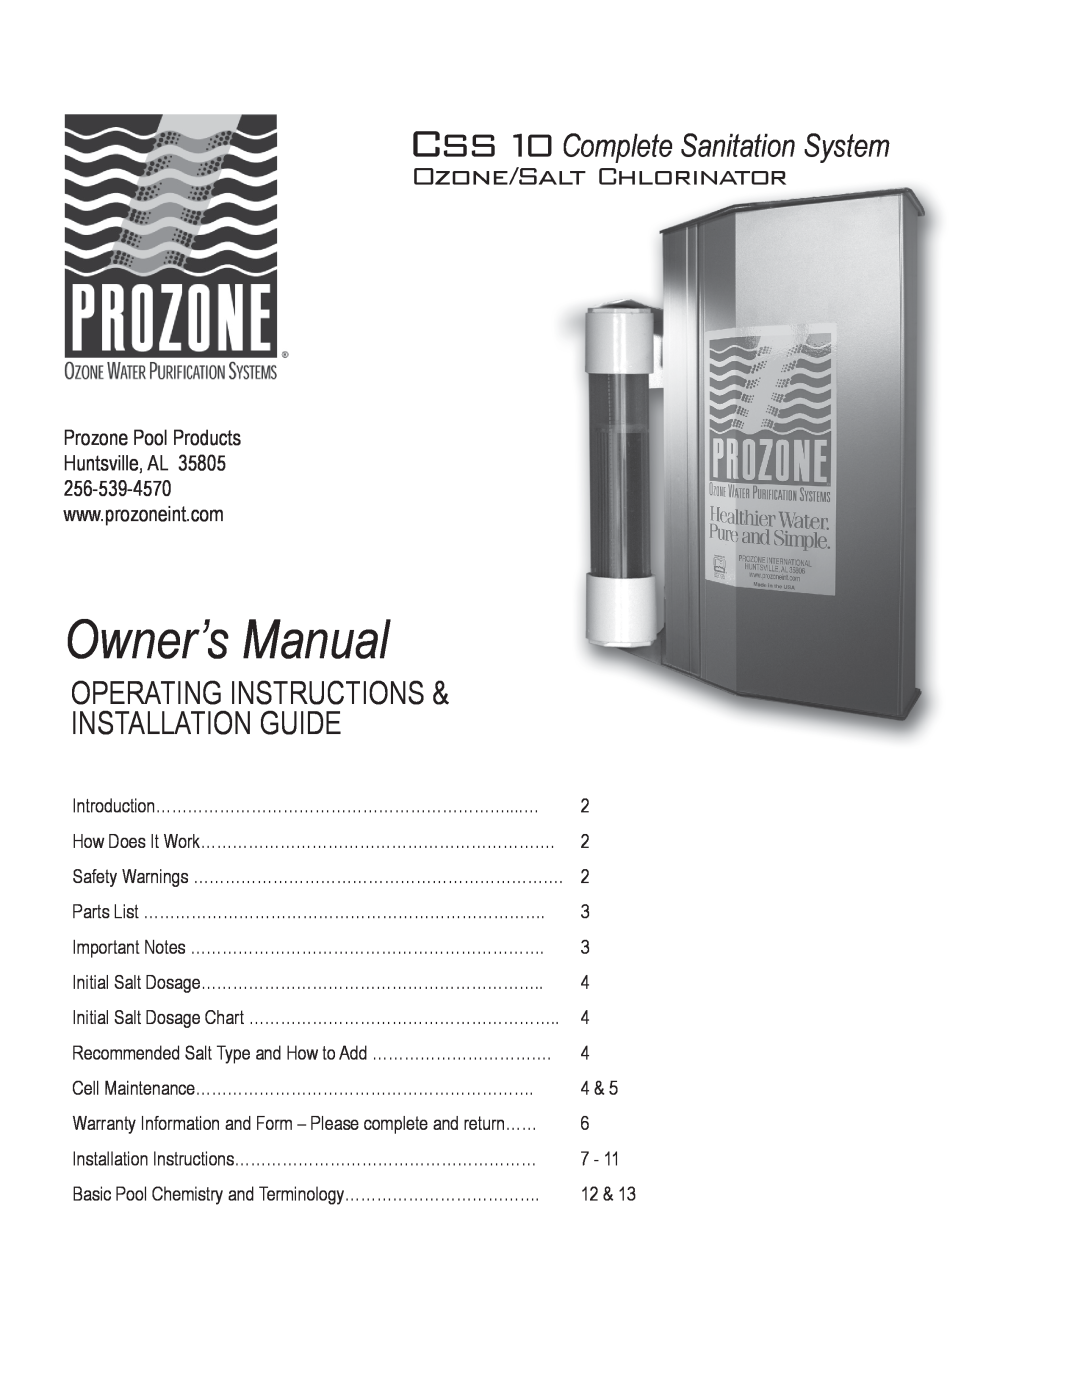 Prozone Pool Products owner manual CSS10 Complete Sanitation System, Ozone/Salt Chlorinator 